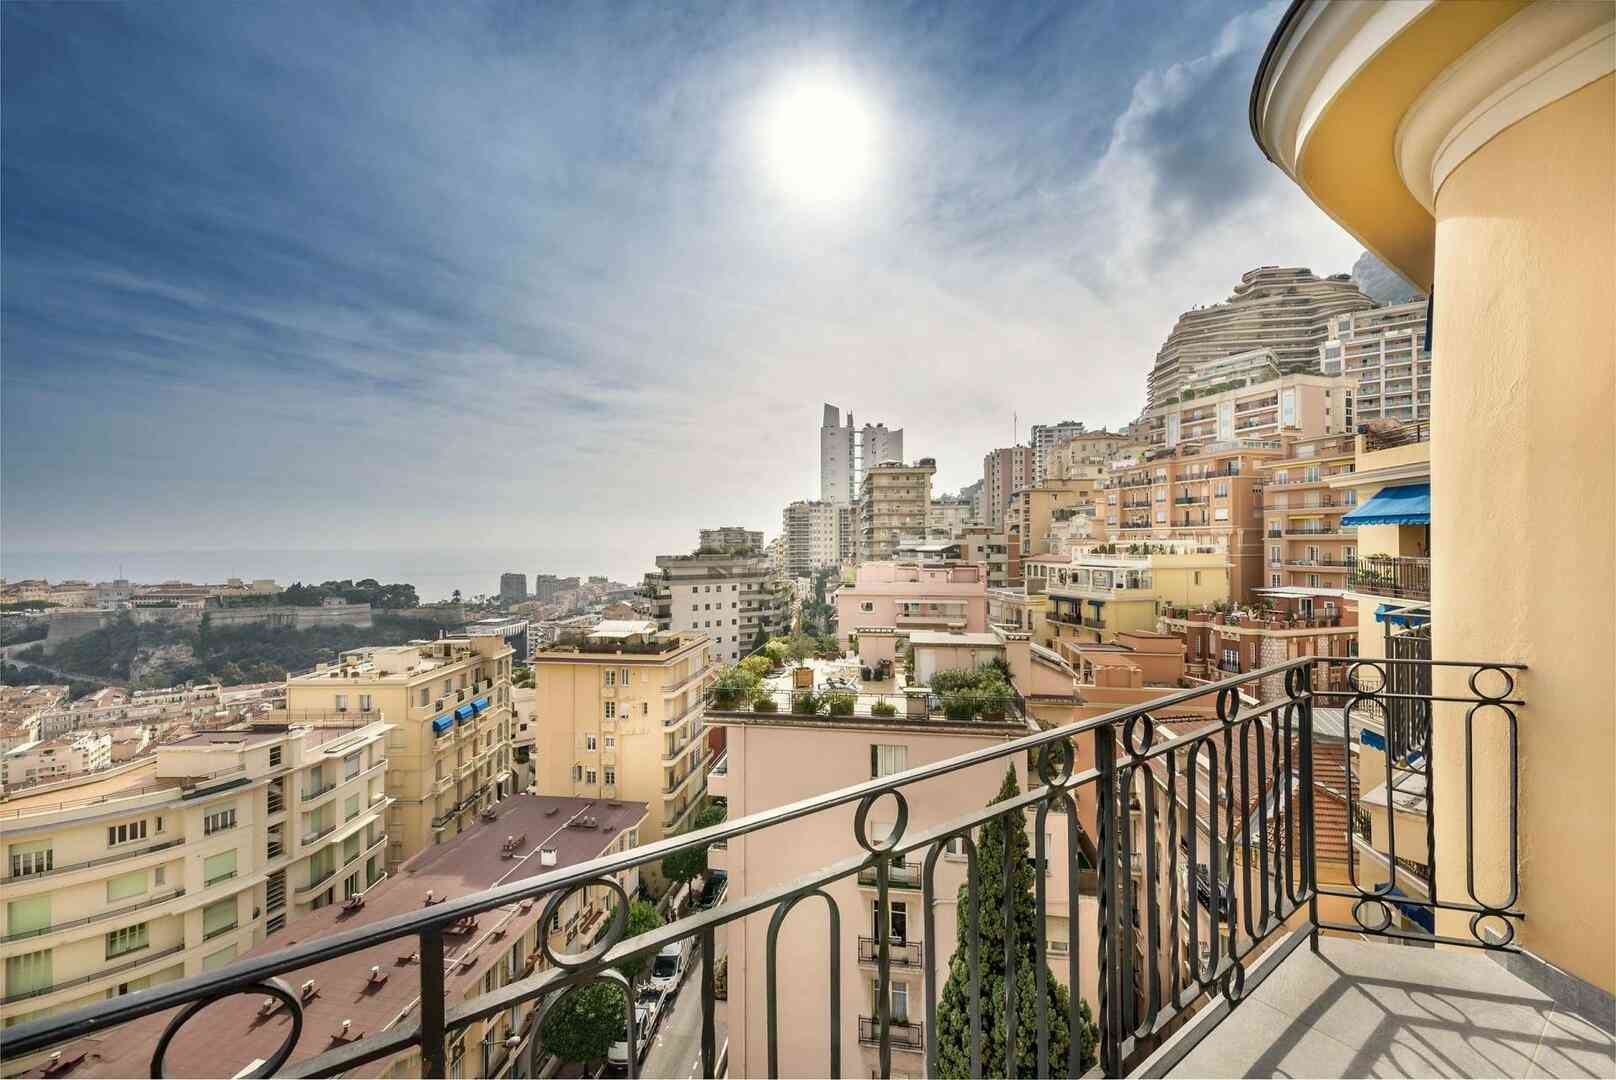                                                                                                                                         3-ROOM PENTHOUSE WITH PANORAMIC SEA VIEW - STEPS AWAY FROM CARRÉ D'OR, MONTE CARLO                                                                    
                                                             